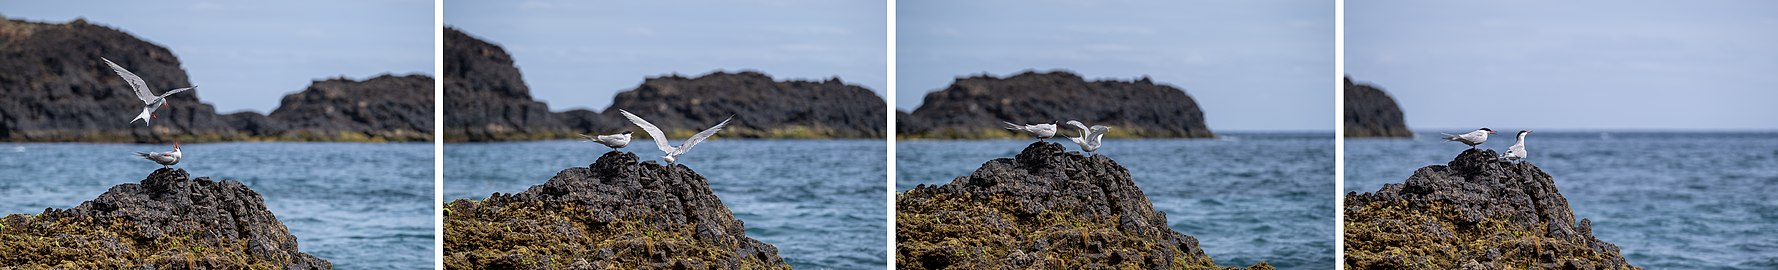 Montage of common terns (Sterna hirundo) near the southern cliffs of Santa Maria, Azores, Portugal